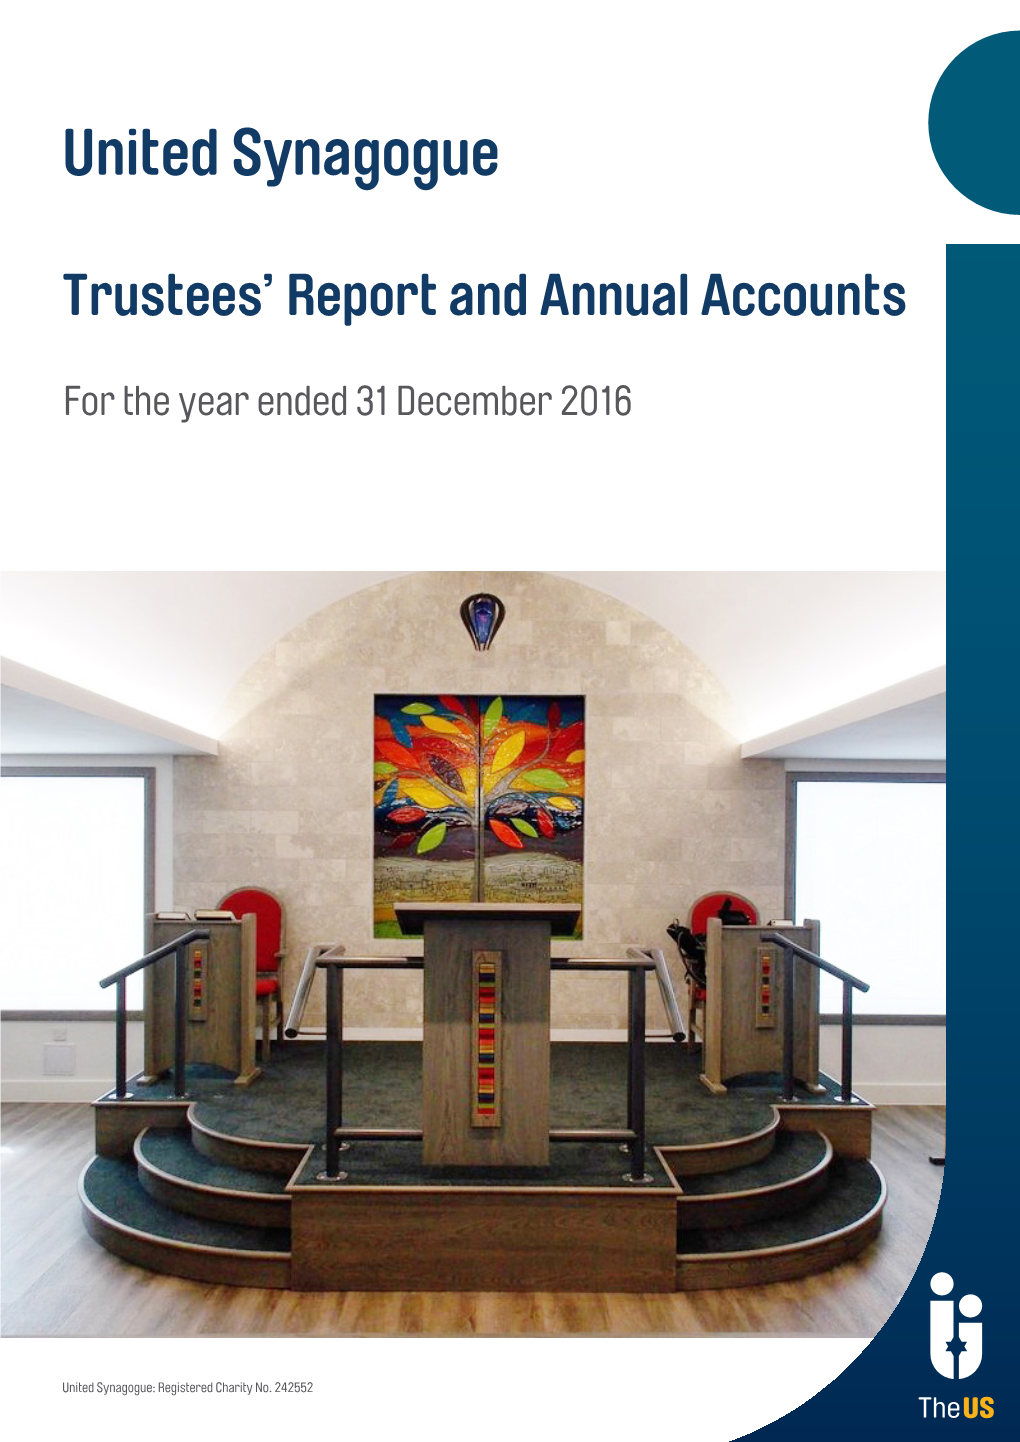 Trustees' Reports and Annual Accounts 2016